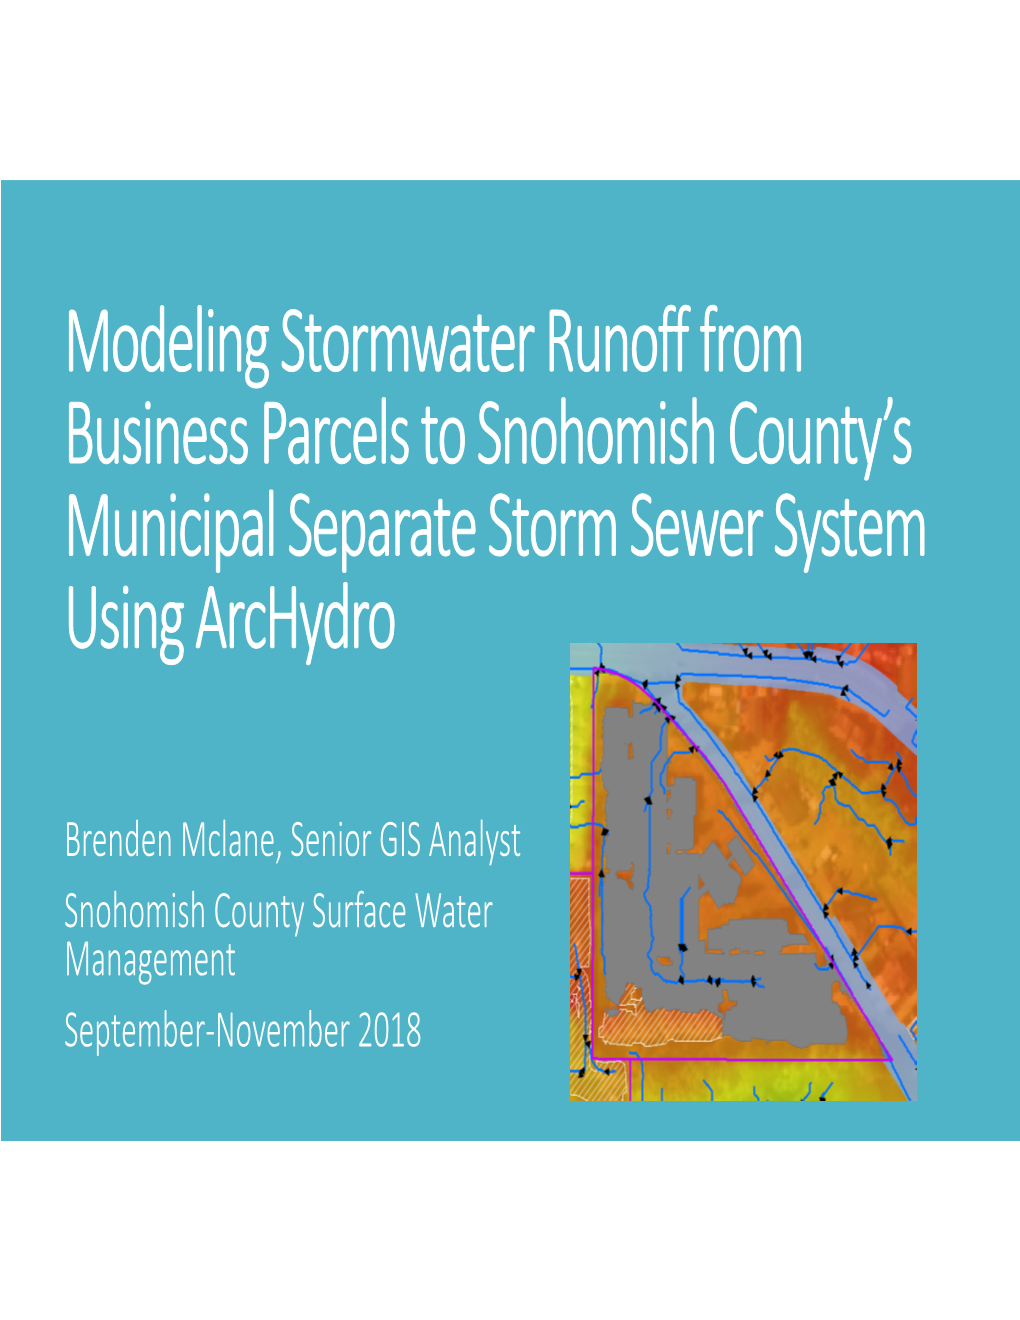 Modeling Stormwaterrunoff from Business Parcels to Snohomish